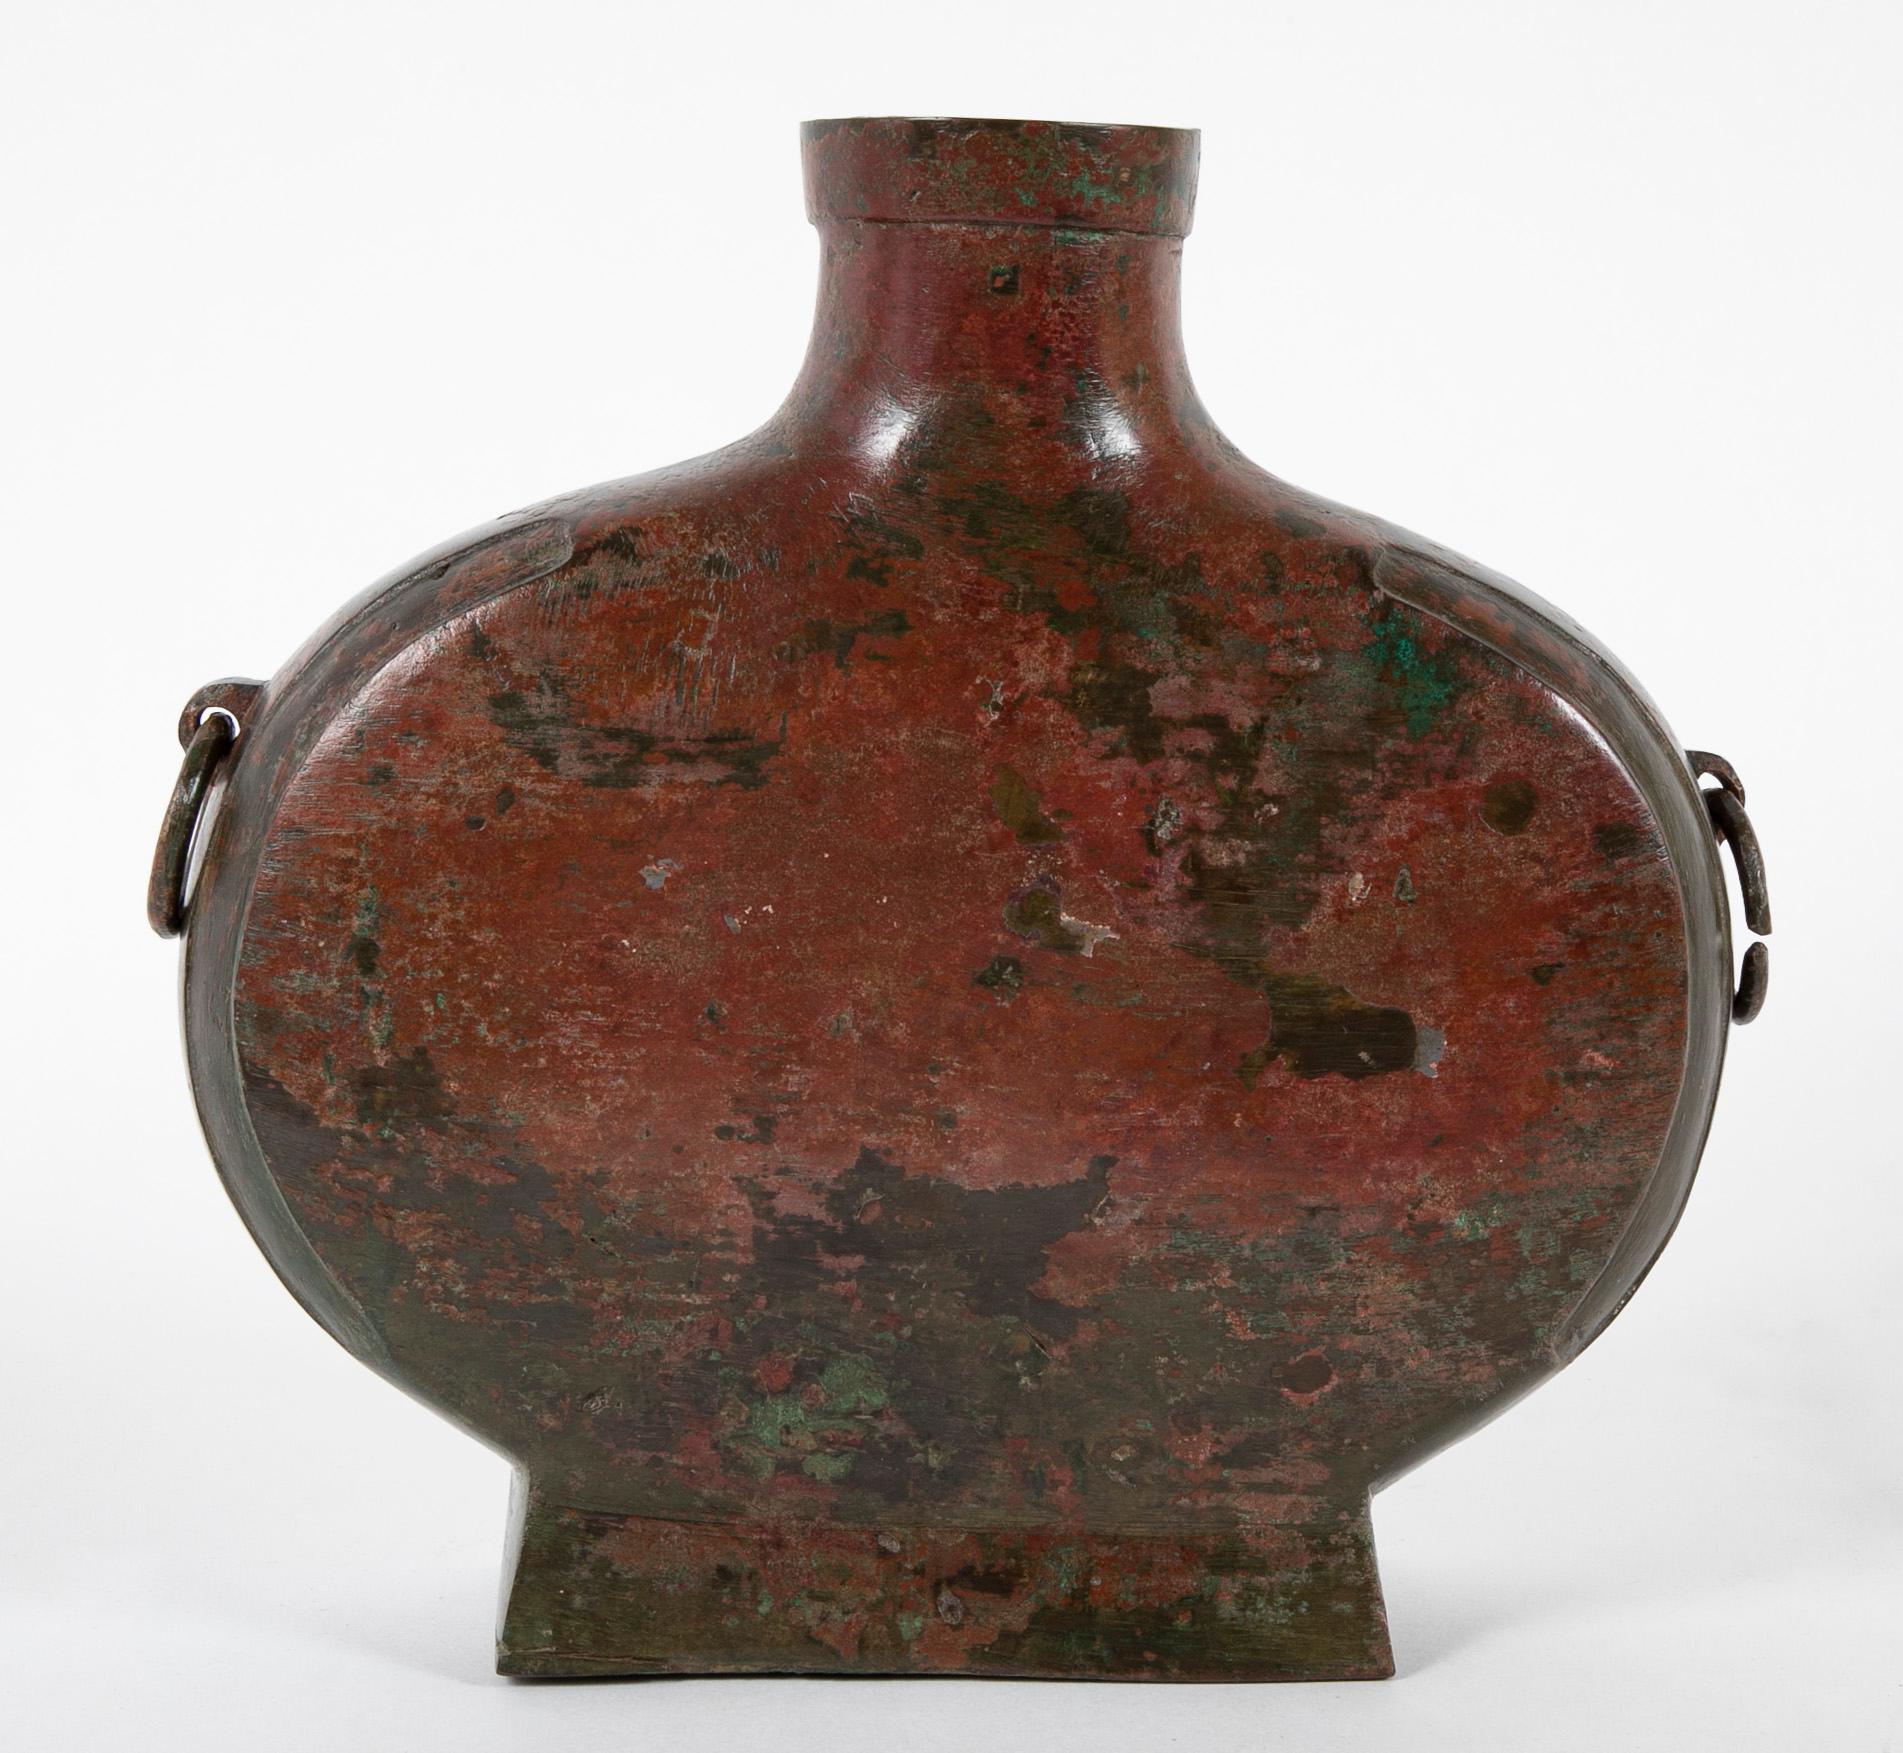 An archaic bronze vessel in flattened flask form with ring handles and mottled red and green patination.